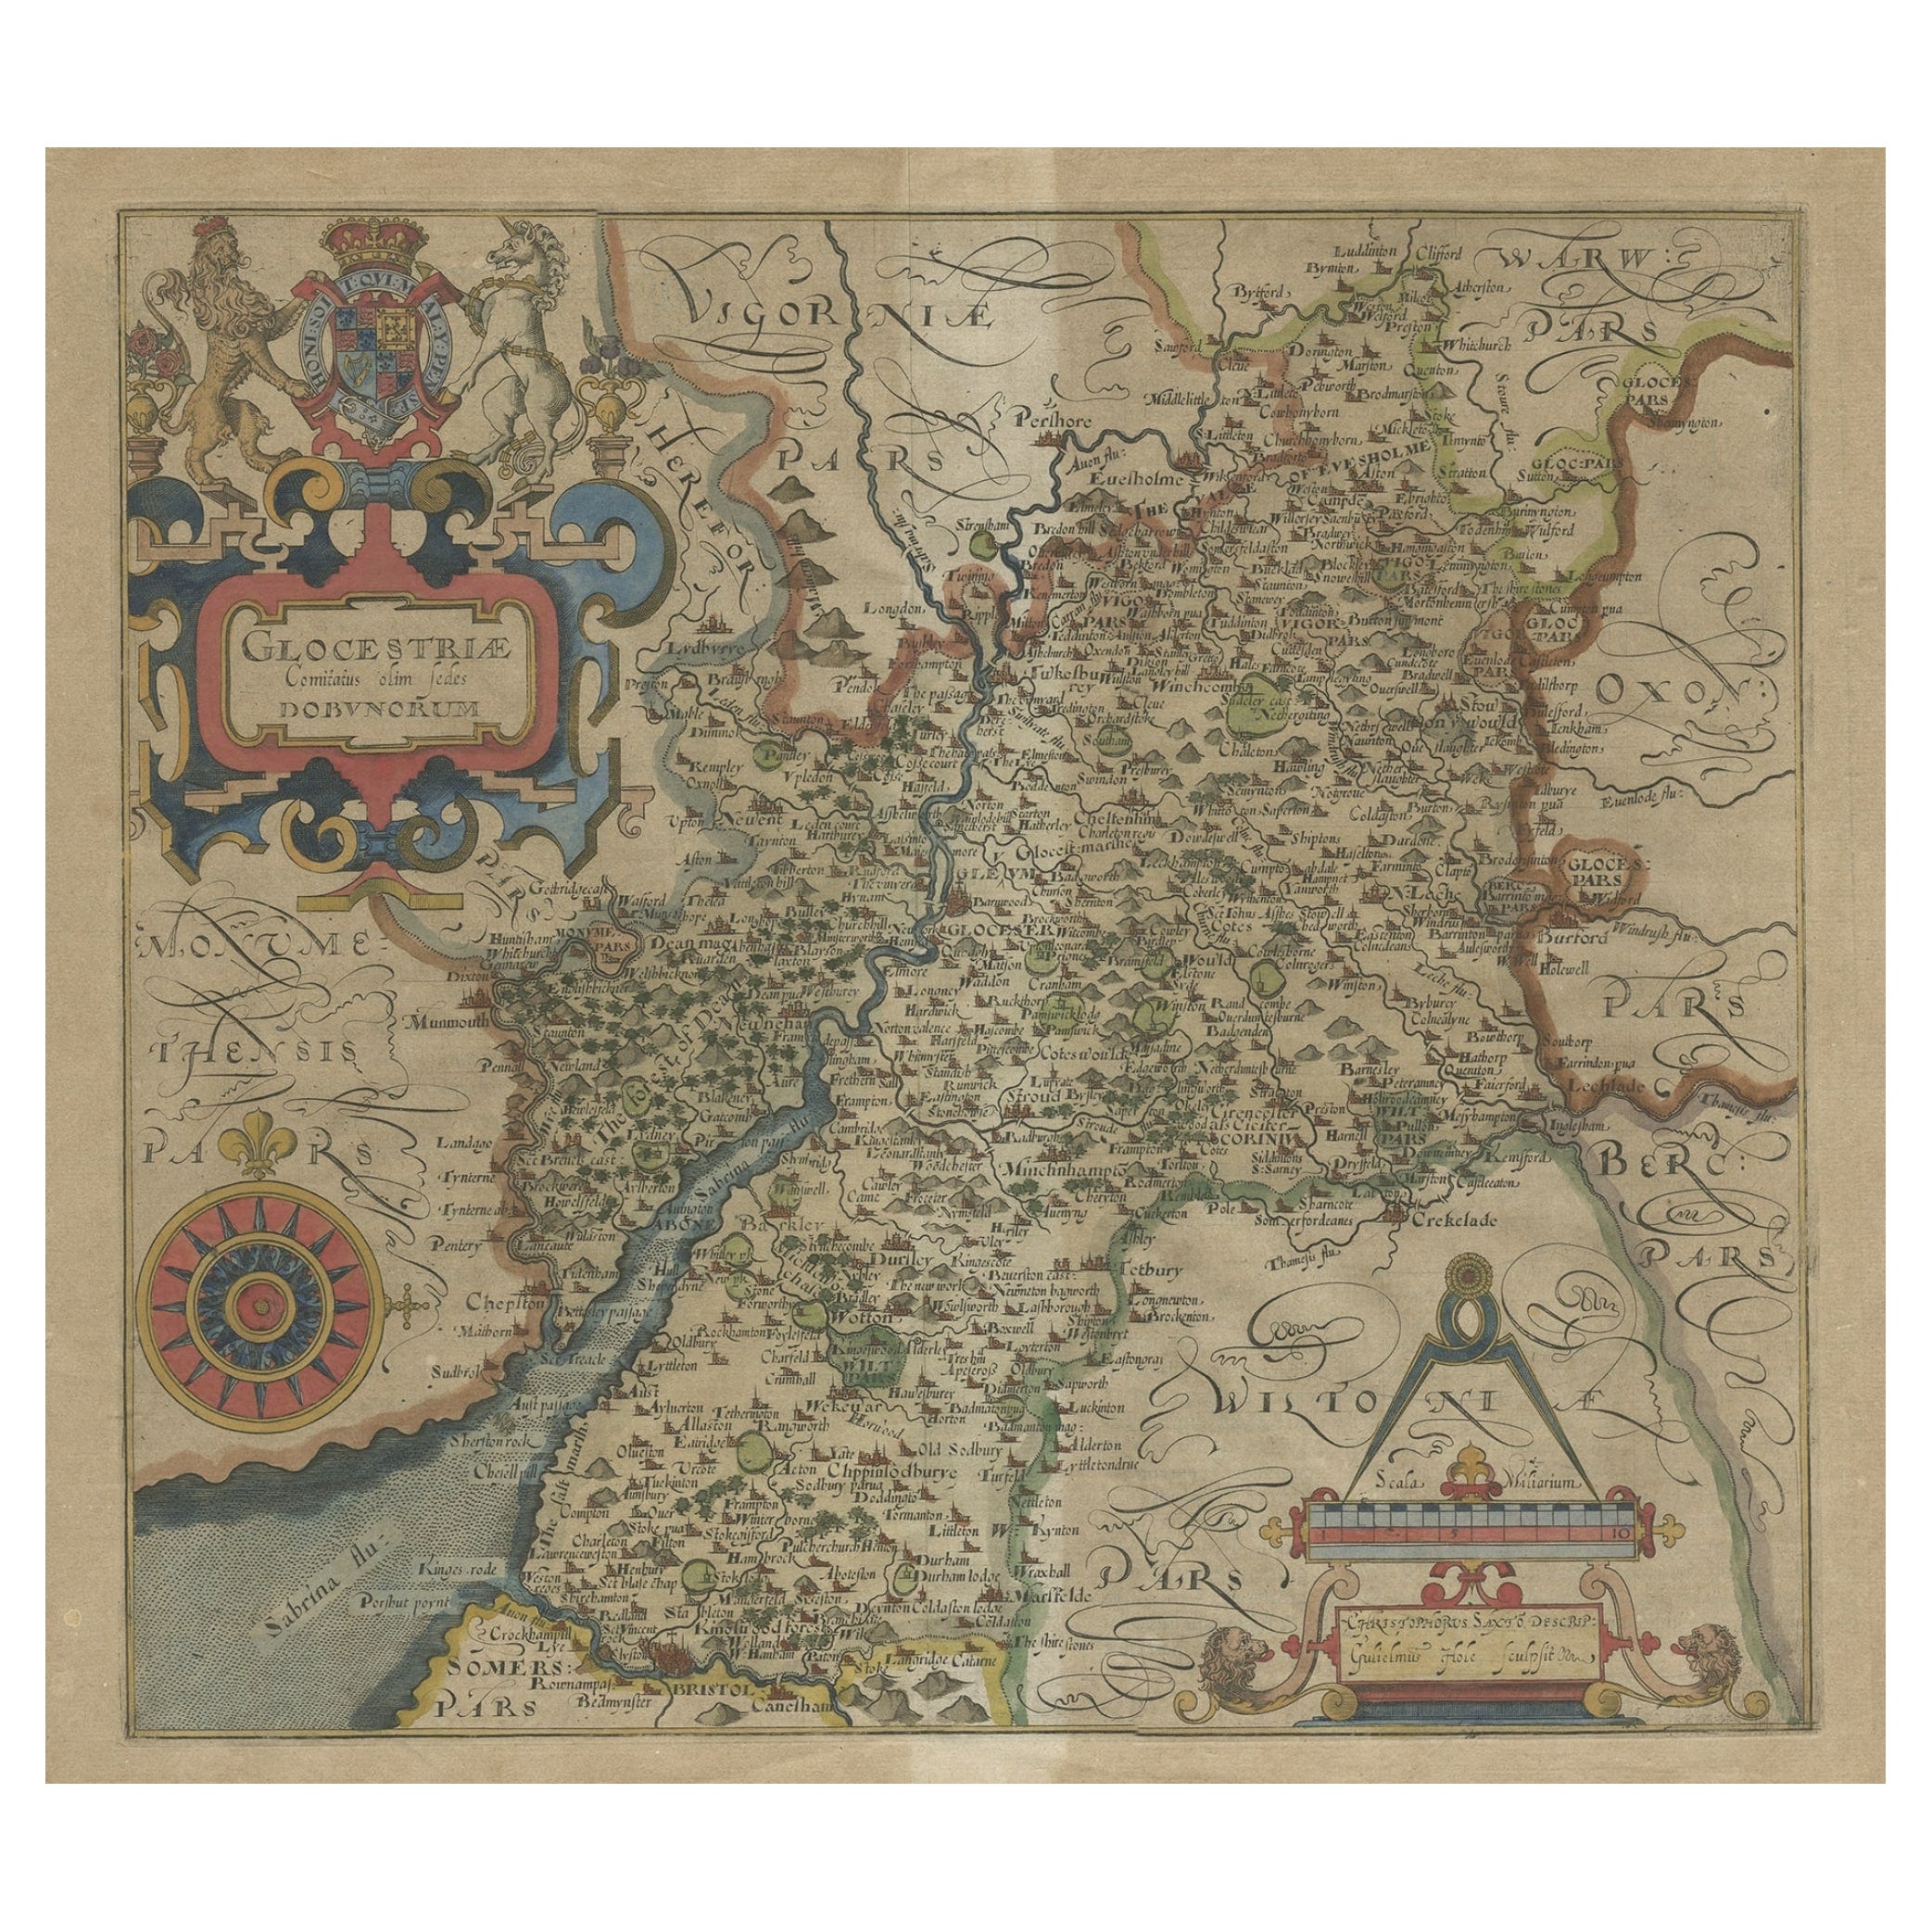 Antique Map of Gloucestershire by Camden, c.1607